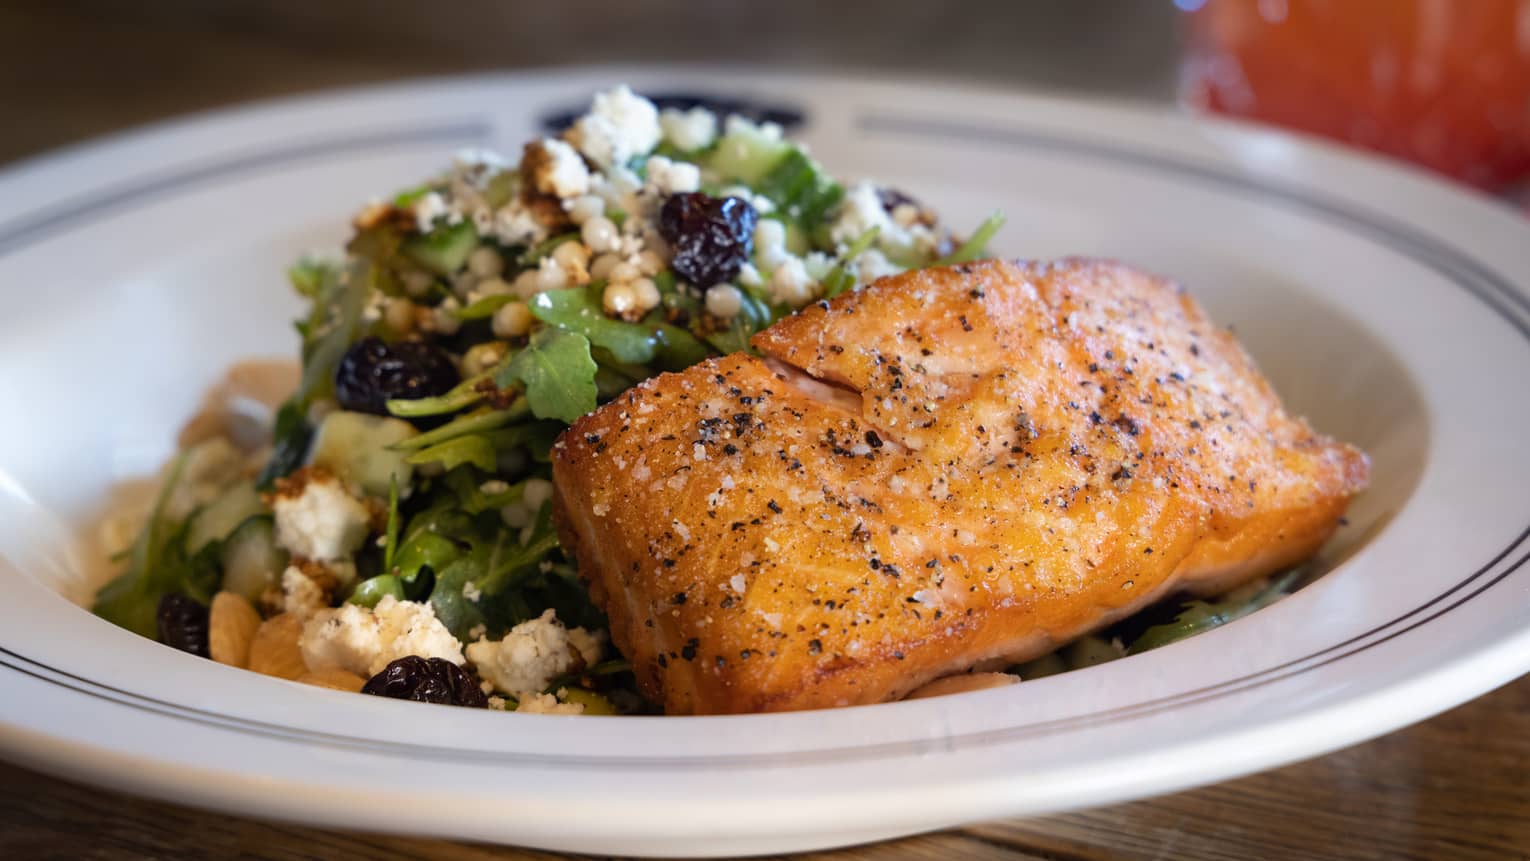 Salmon with a green salad in a white bowl.